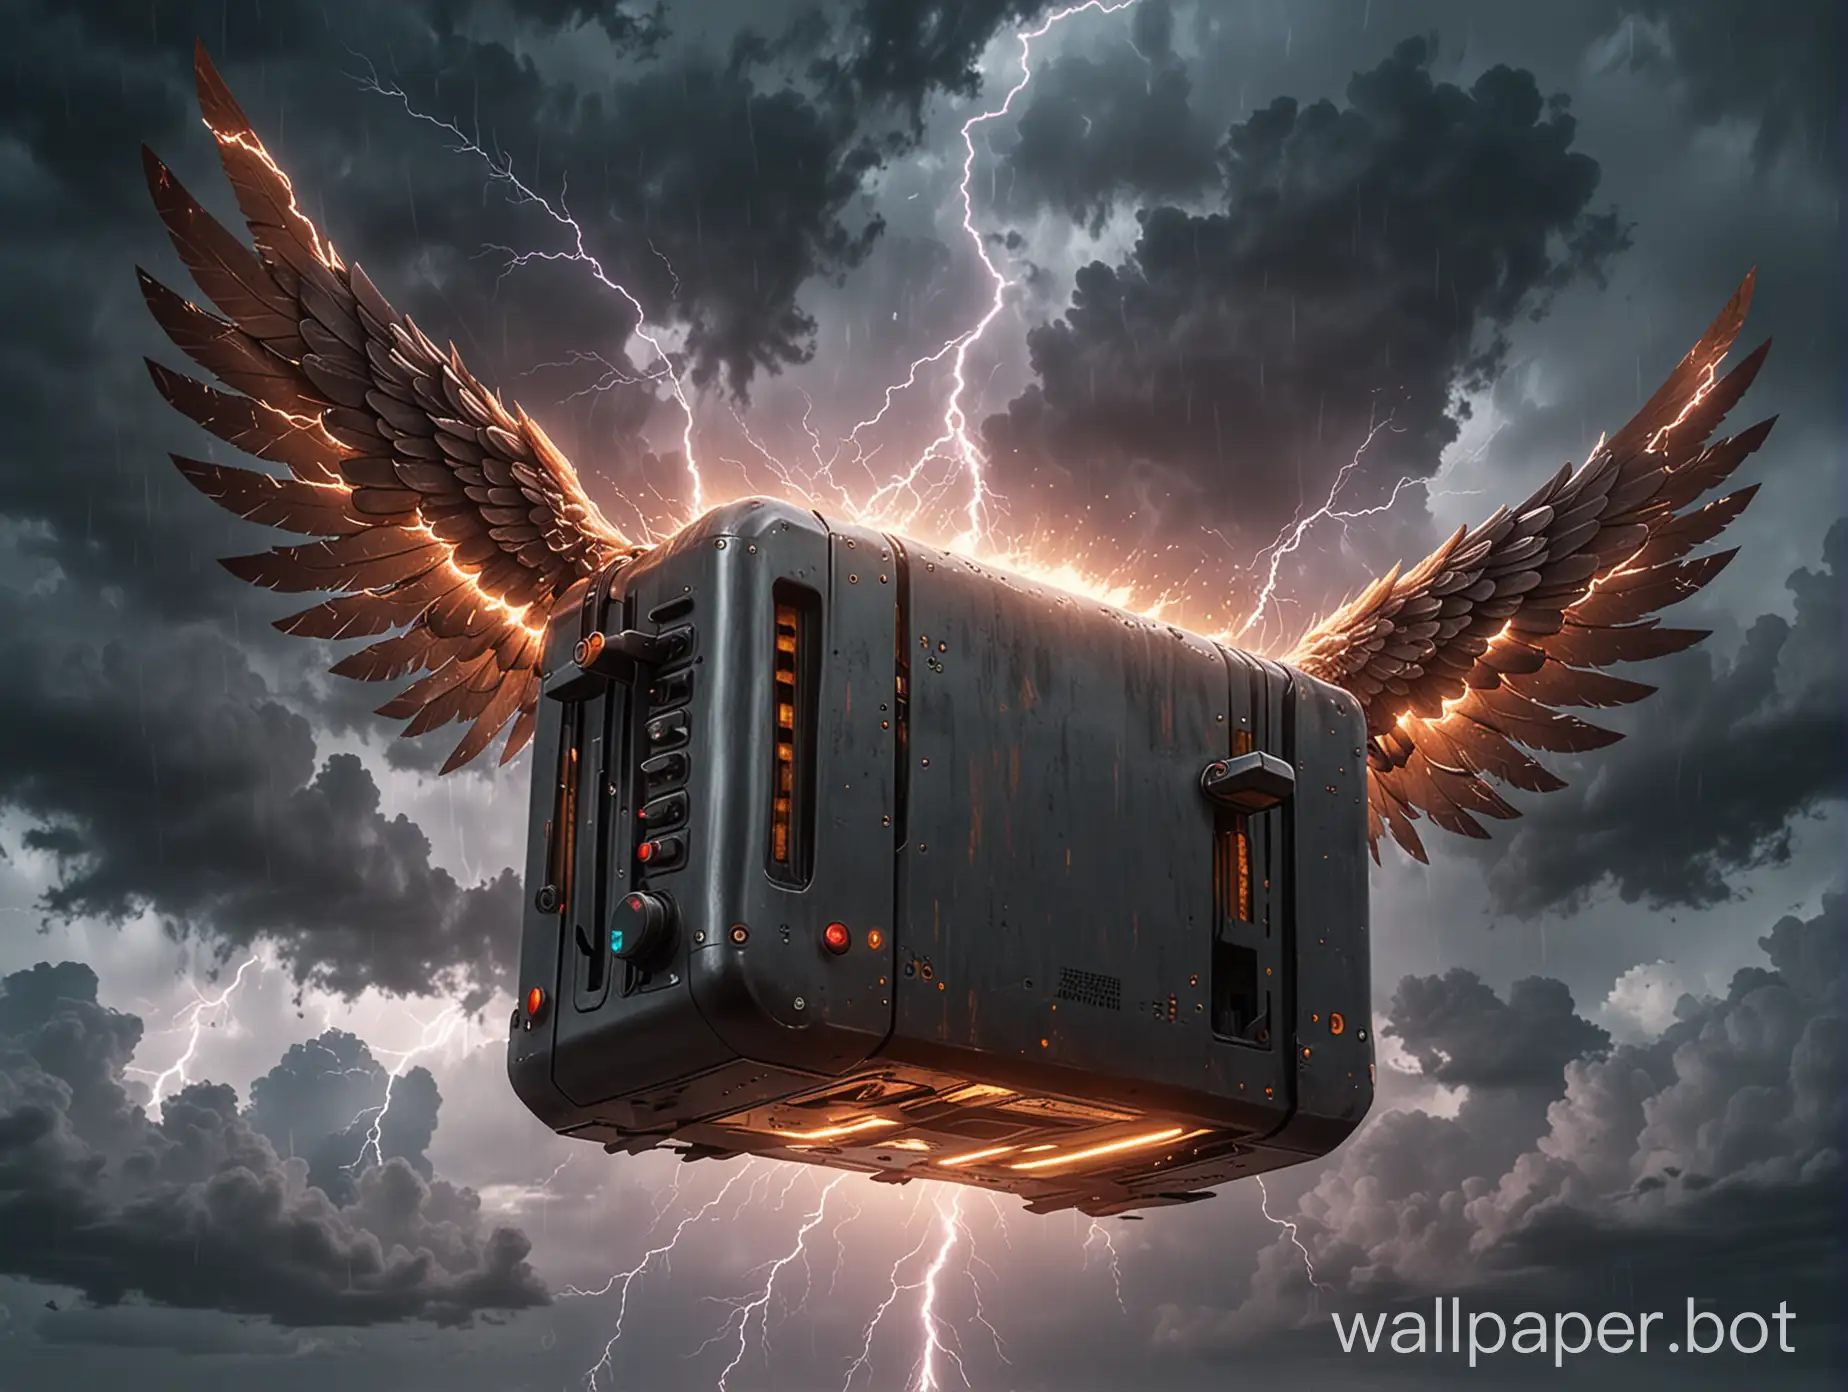 generate a toaster with wings in the stormy sky which is getting shock by an lightning while flying with big cyberpunk metal wings